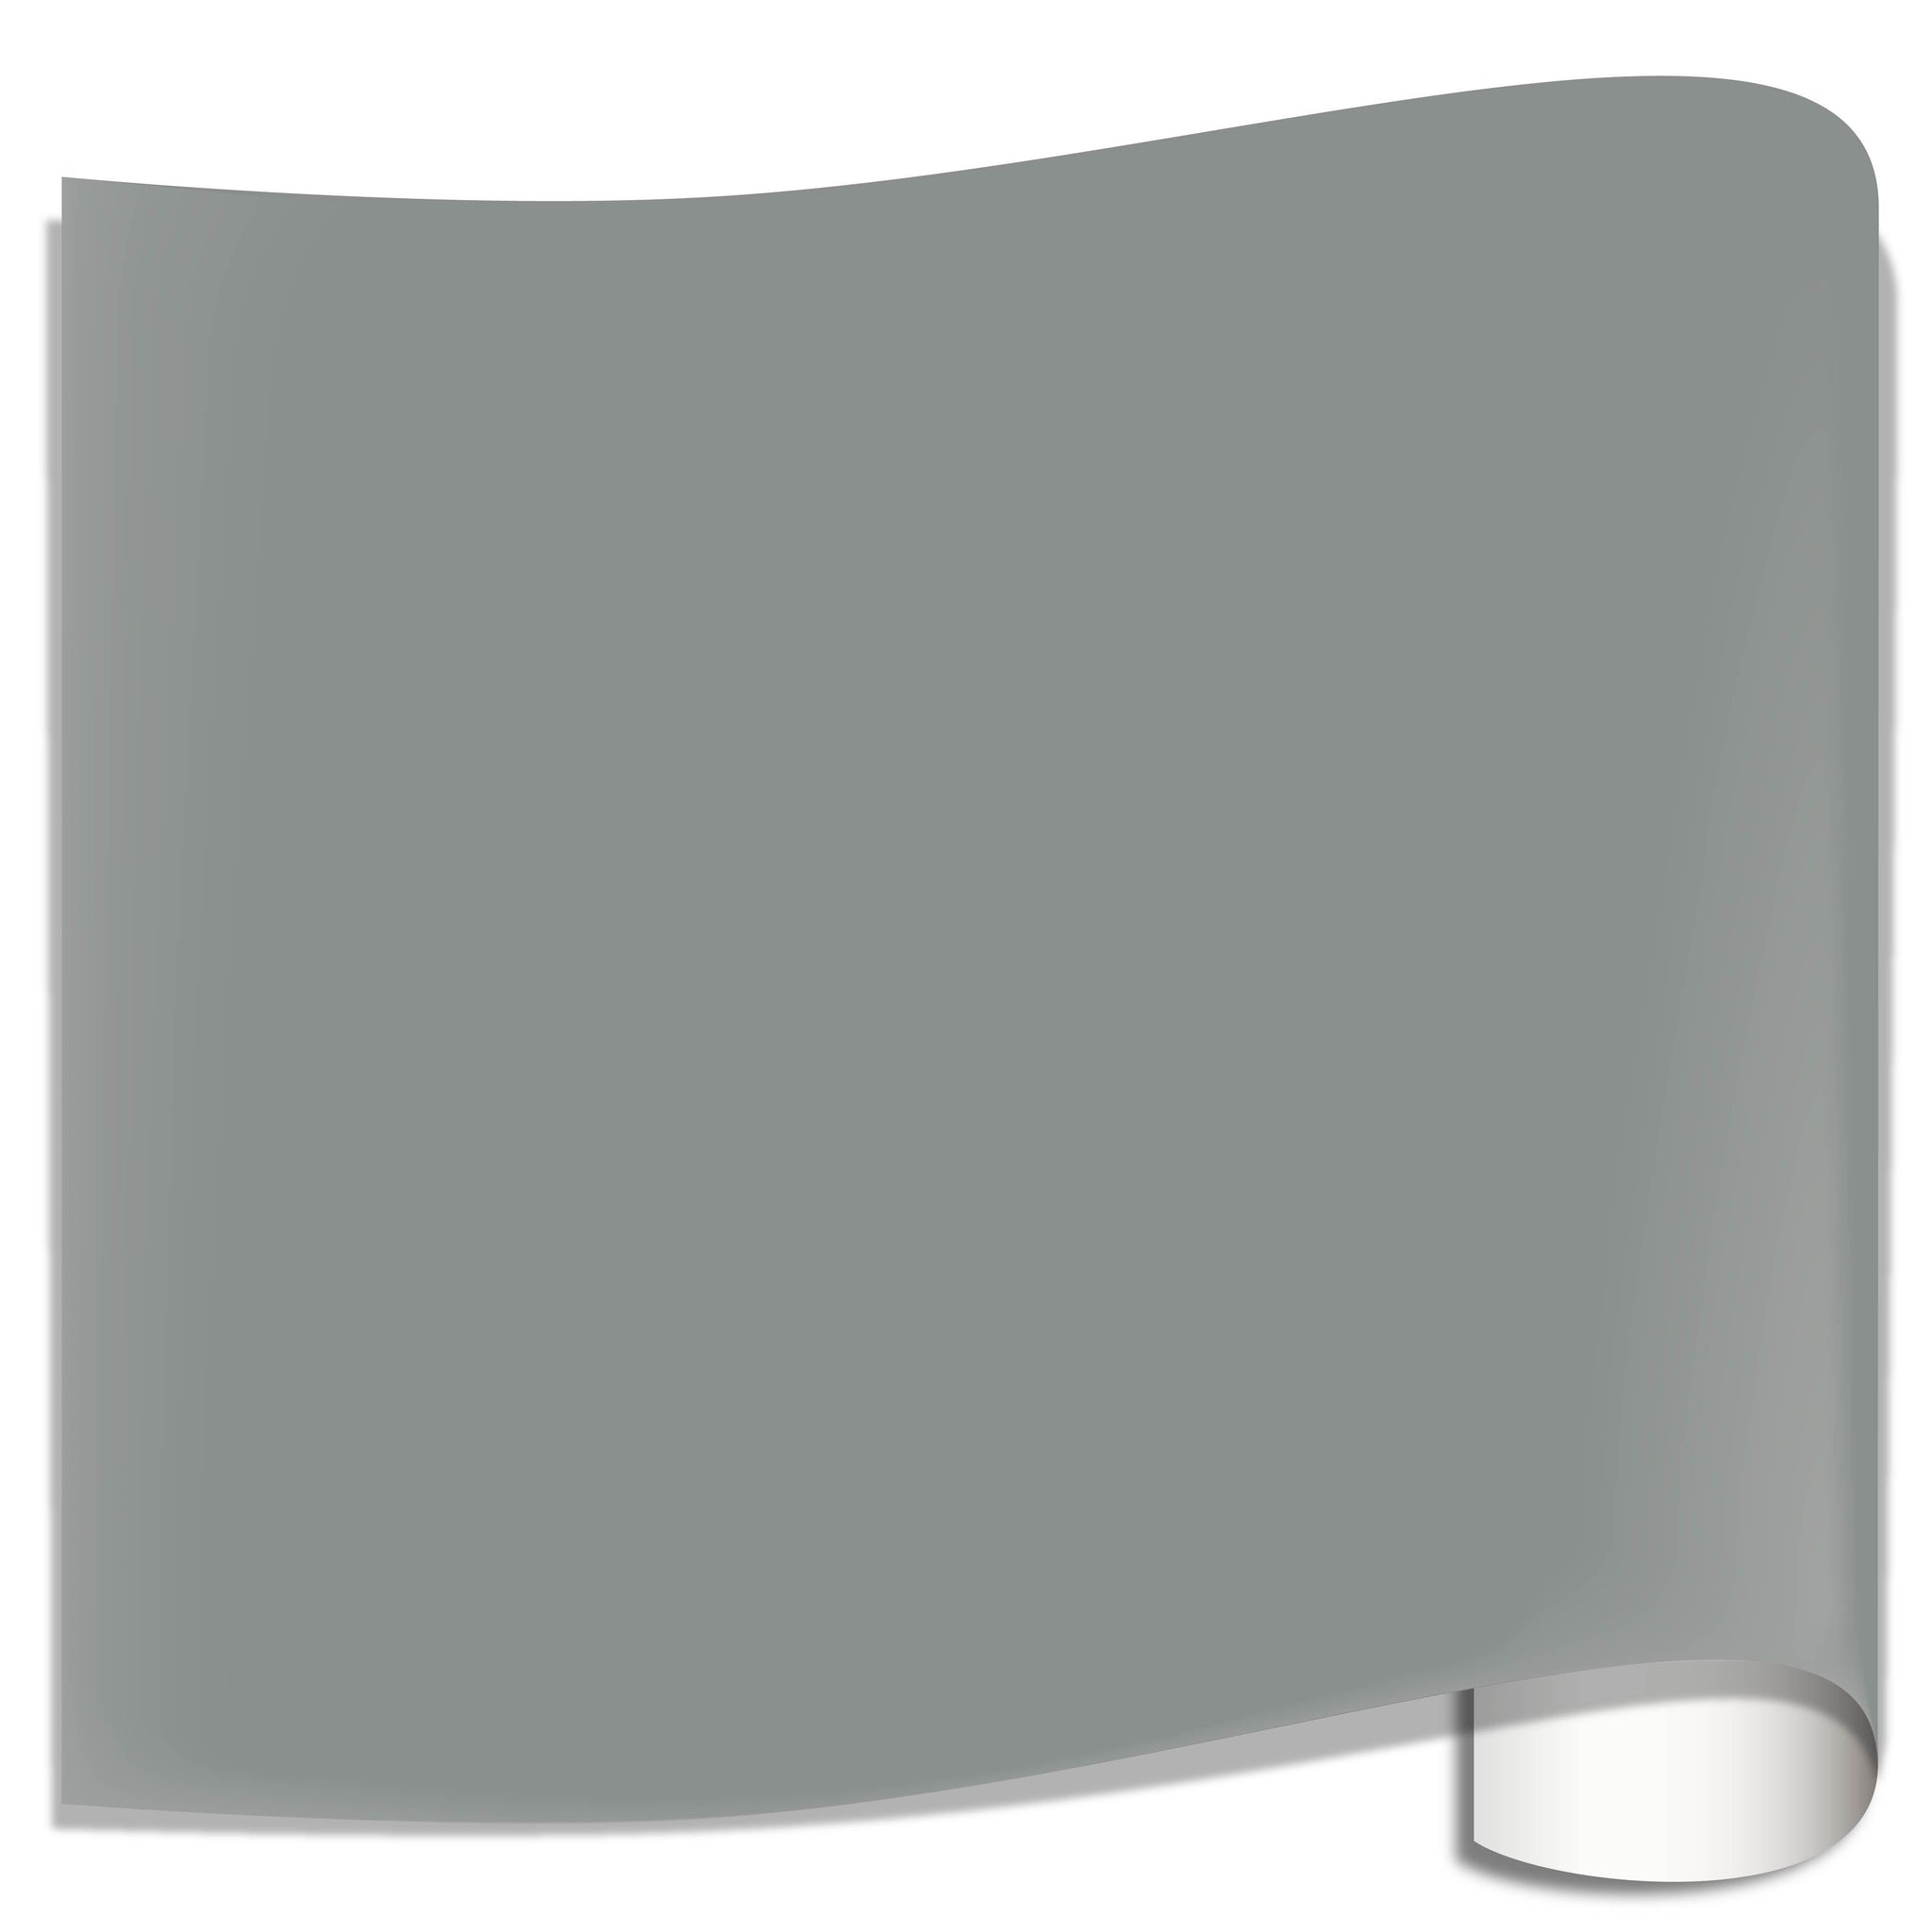 Oracal 651 Glossy Vinyl Sheets on Sale